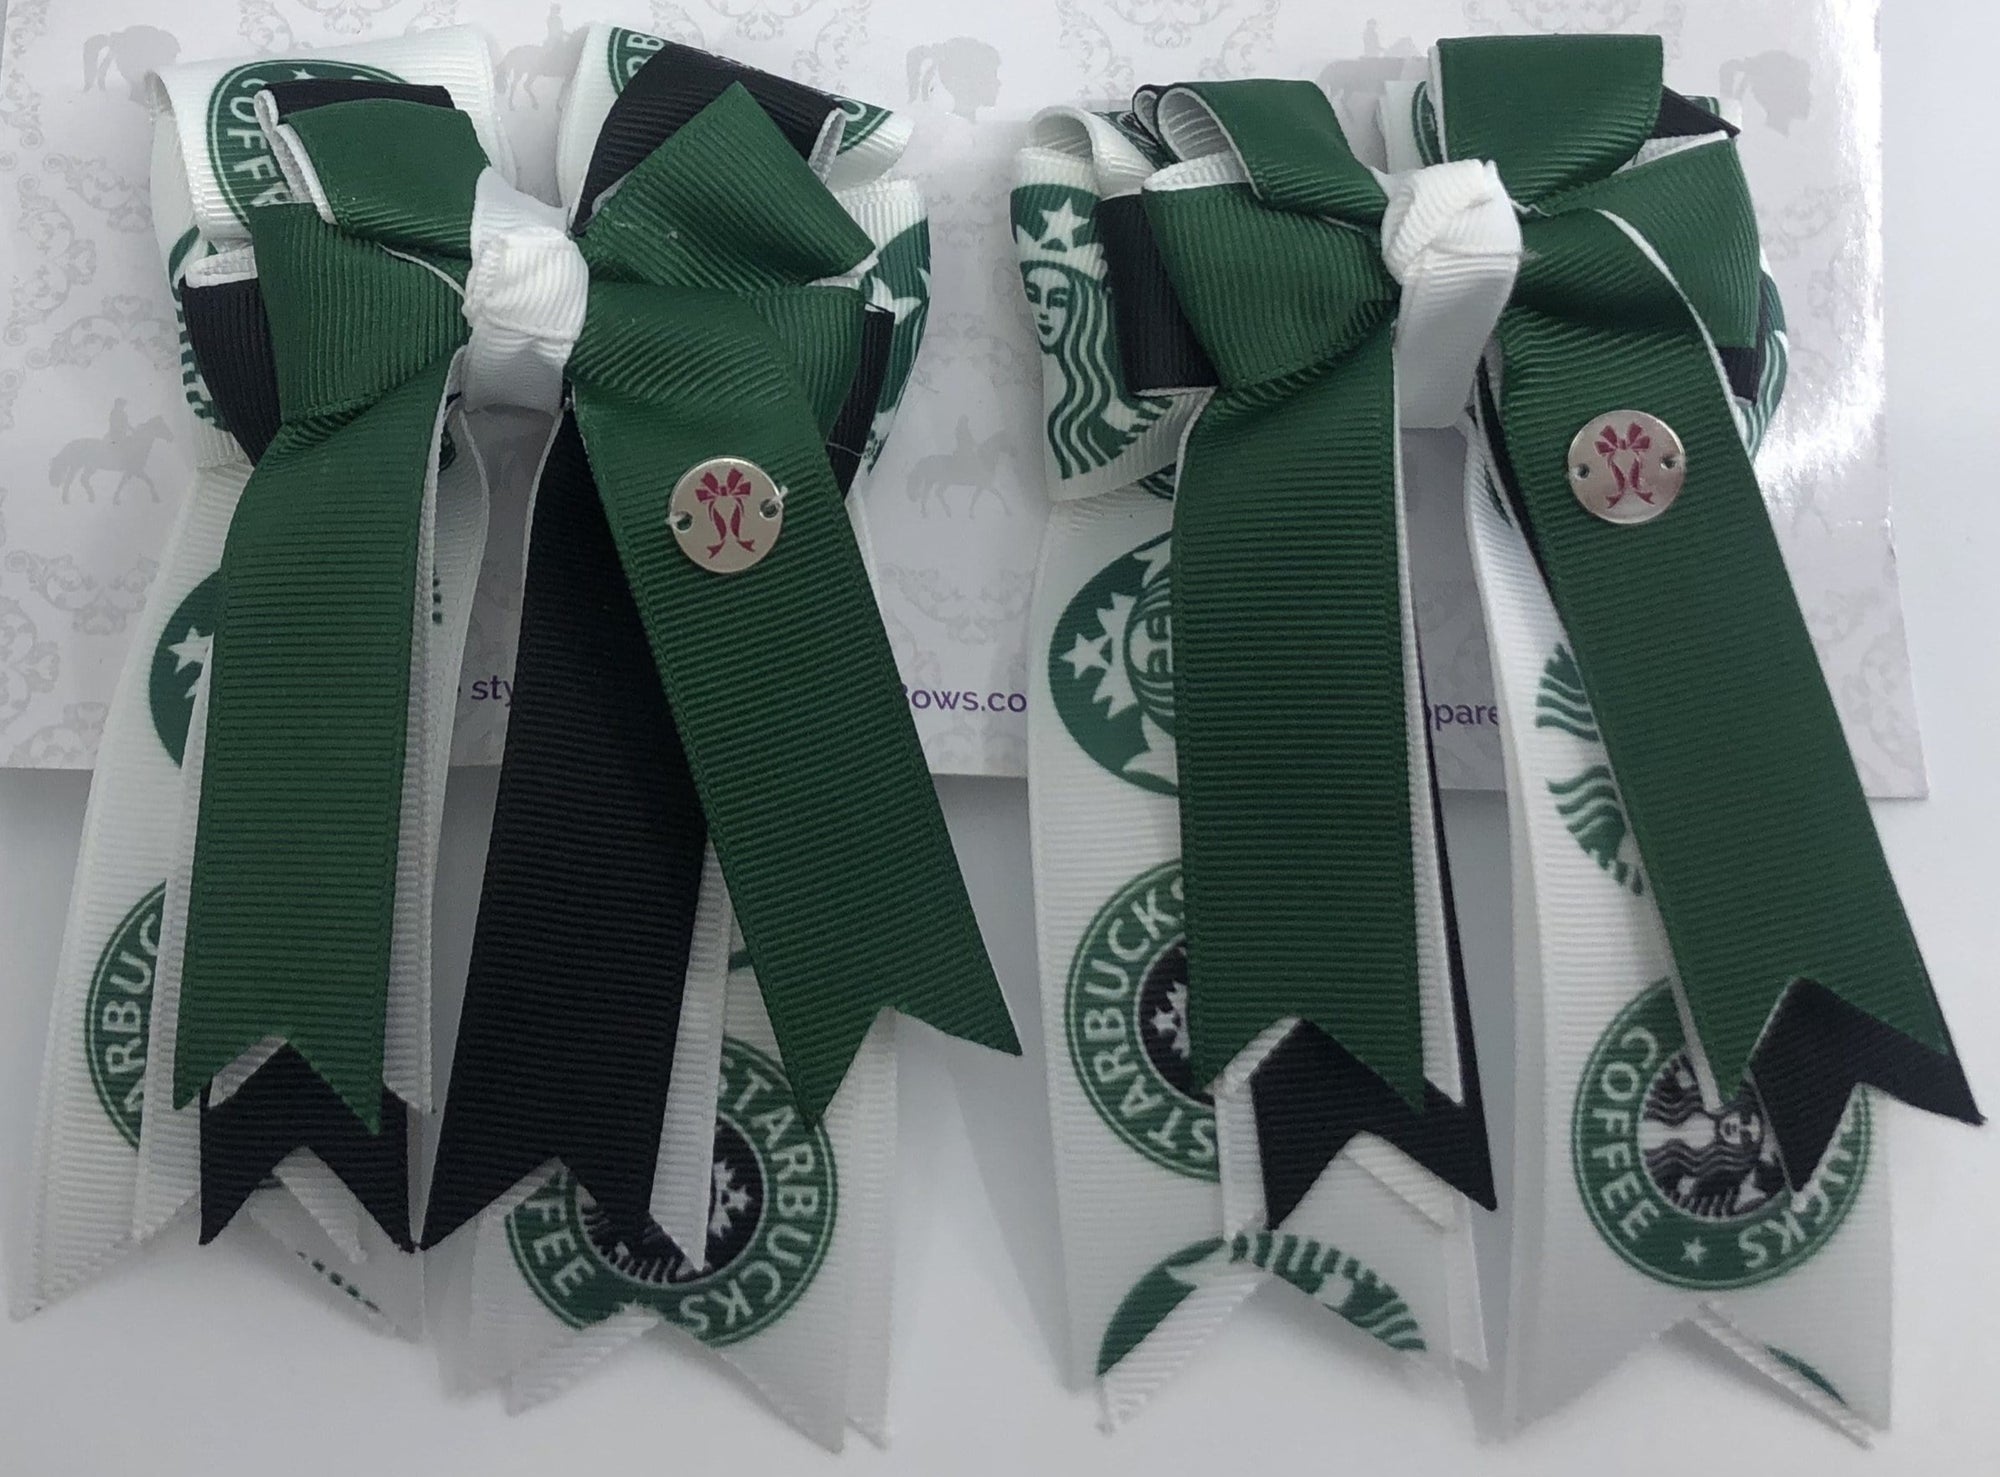 PonyTail Bows 3" Tails Starbucks PonyTail Bows equestrian team apparel online tack store mobile tack store custom farm apparel custom show stable clothing equestrian lifestyle horse show clothing riding clothes PonyTail Bows | Equestrian Hair Accessories horses equestrian tack store